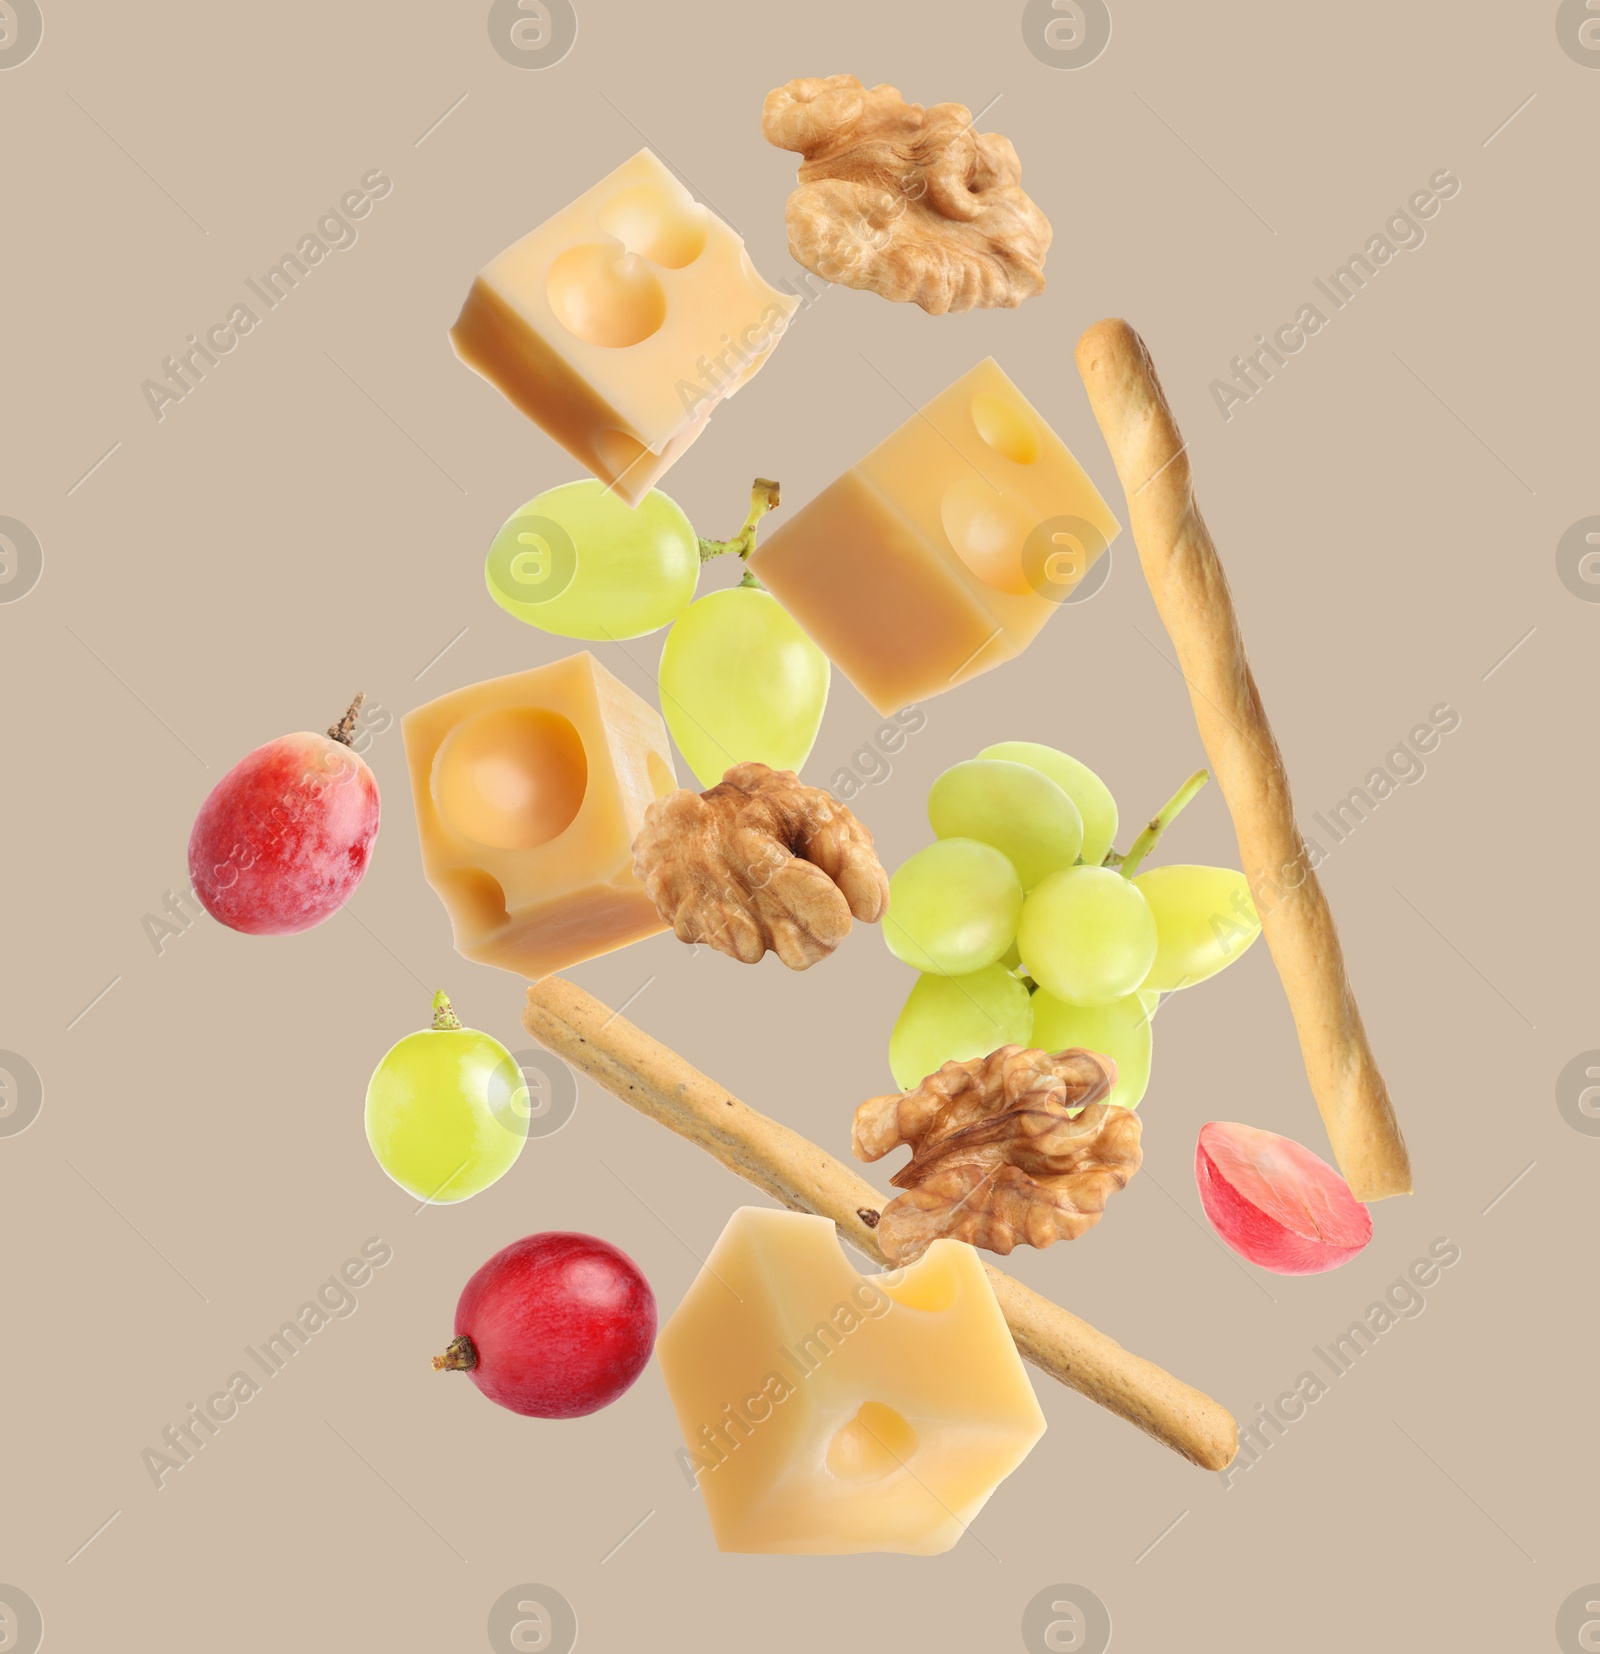 Image of Cheese, breadsticks, grapes and walnuts falling against beige background